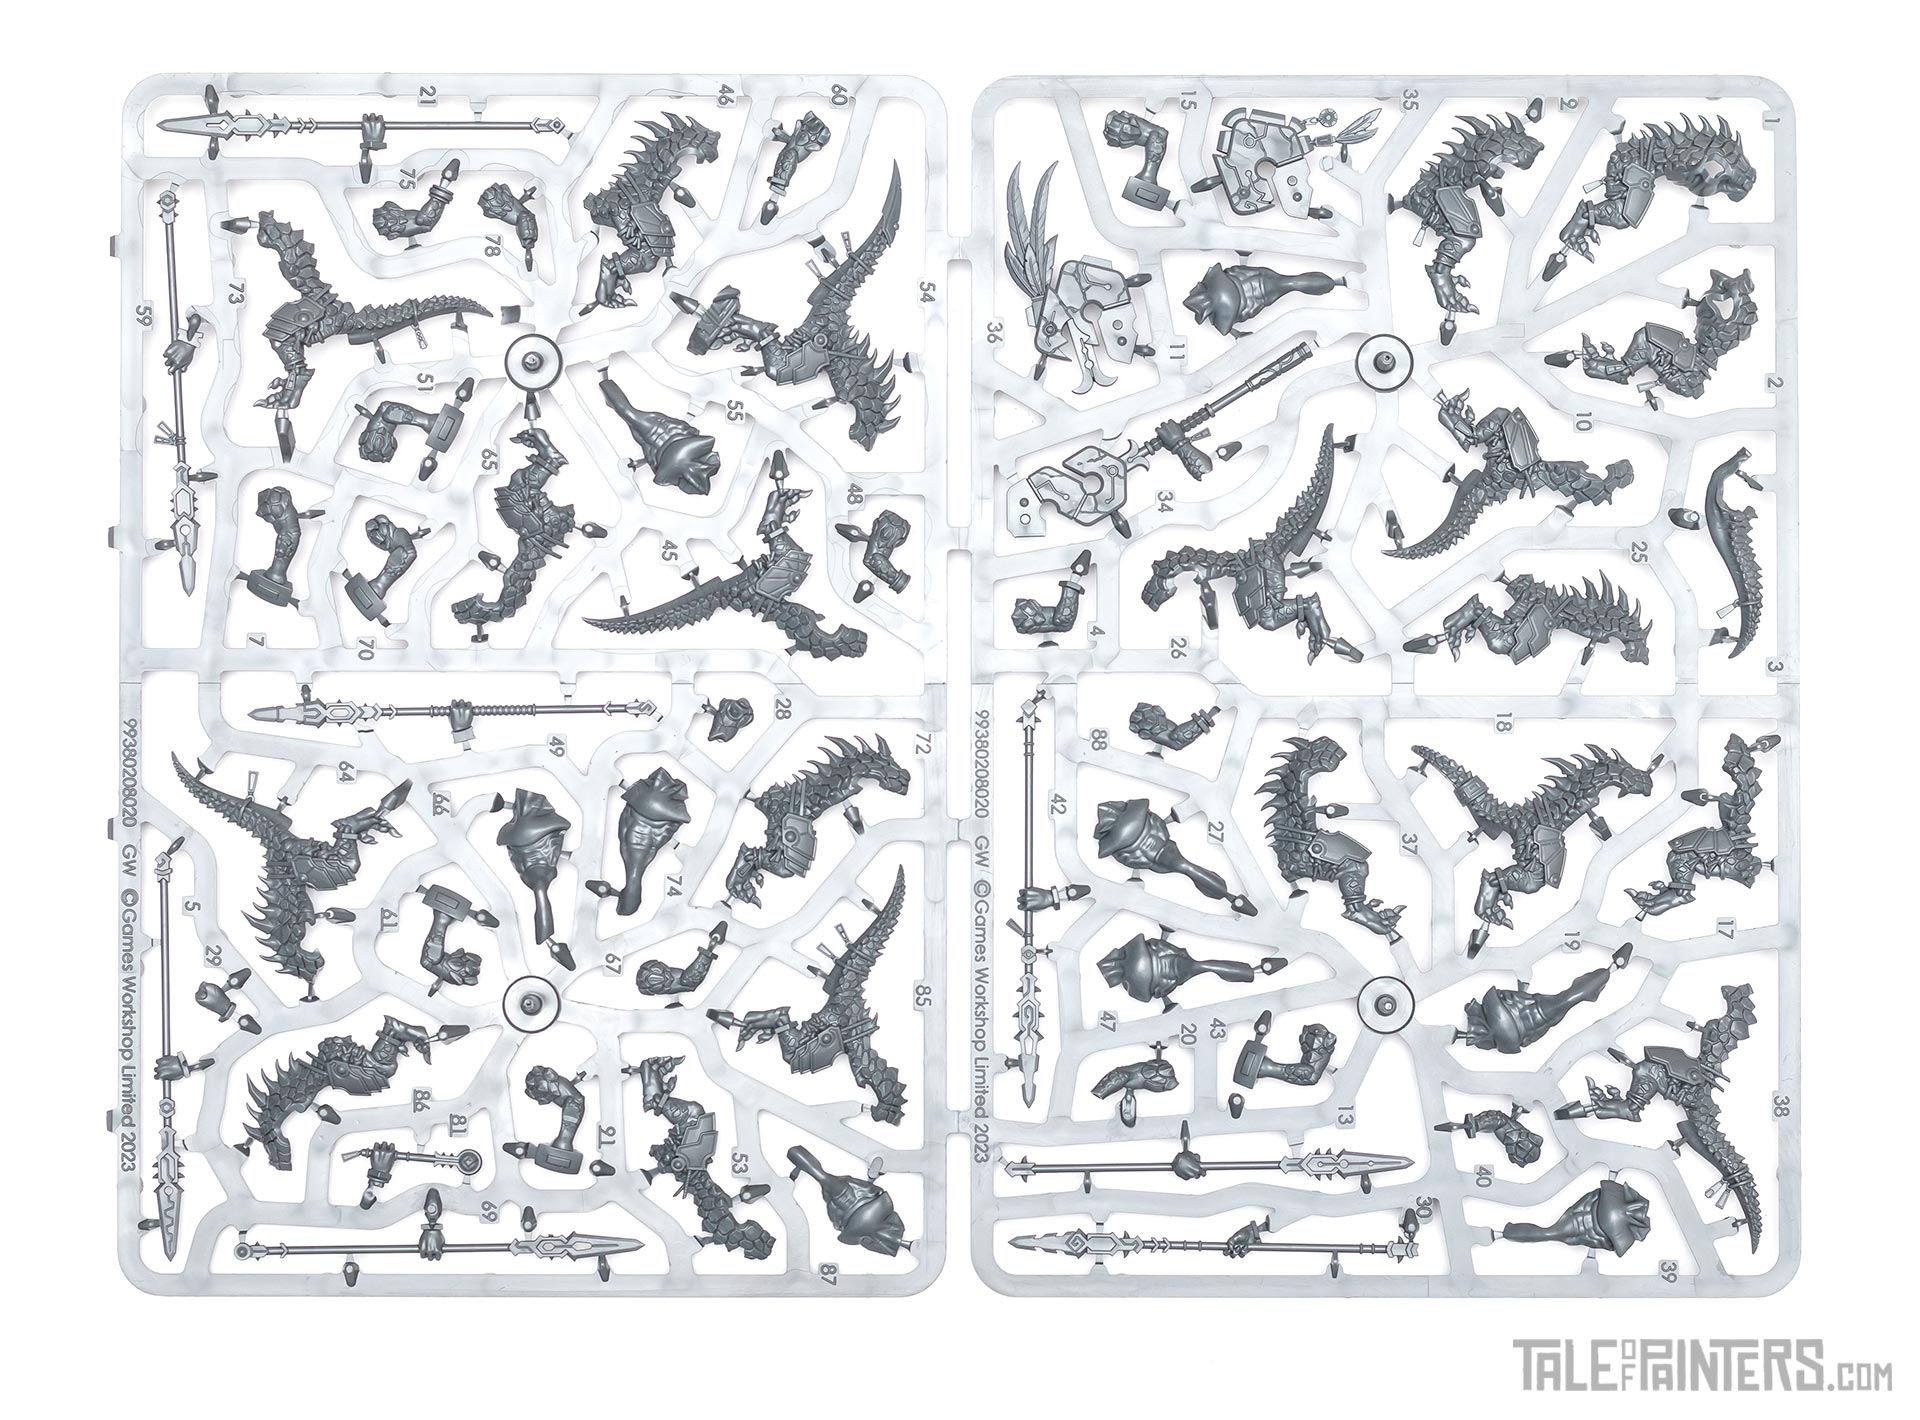 Saurus Warriors sprues 1 and 2 from the Seraphon army set